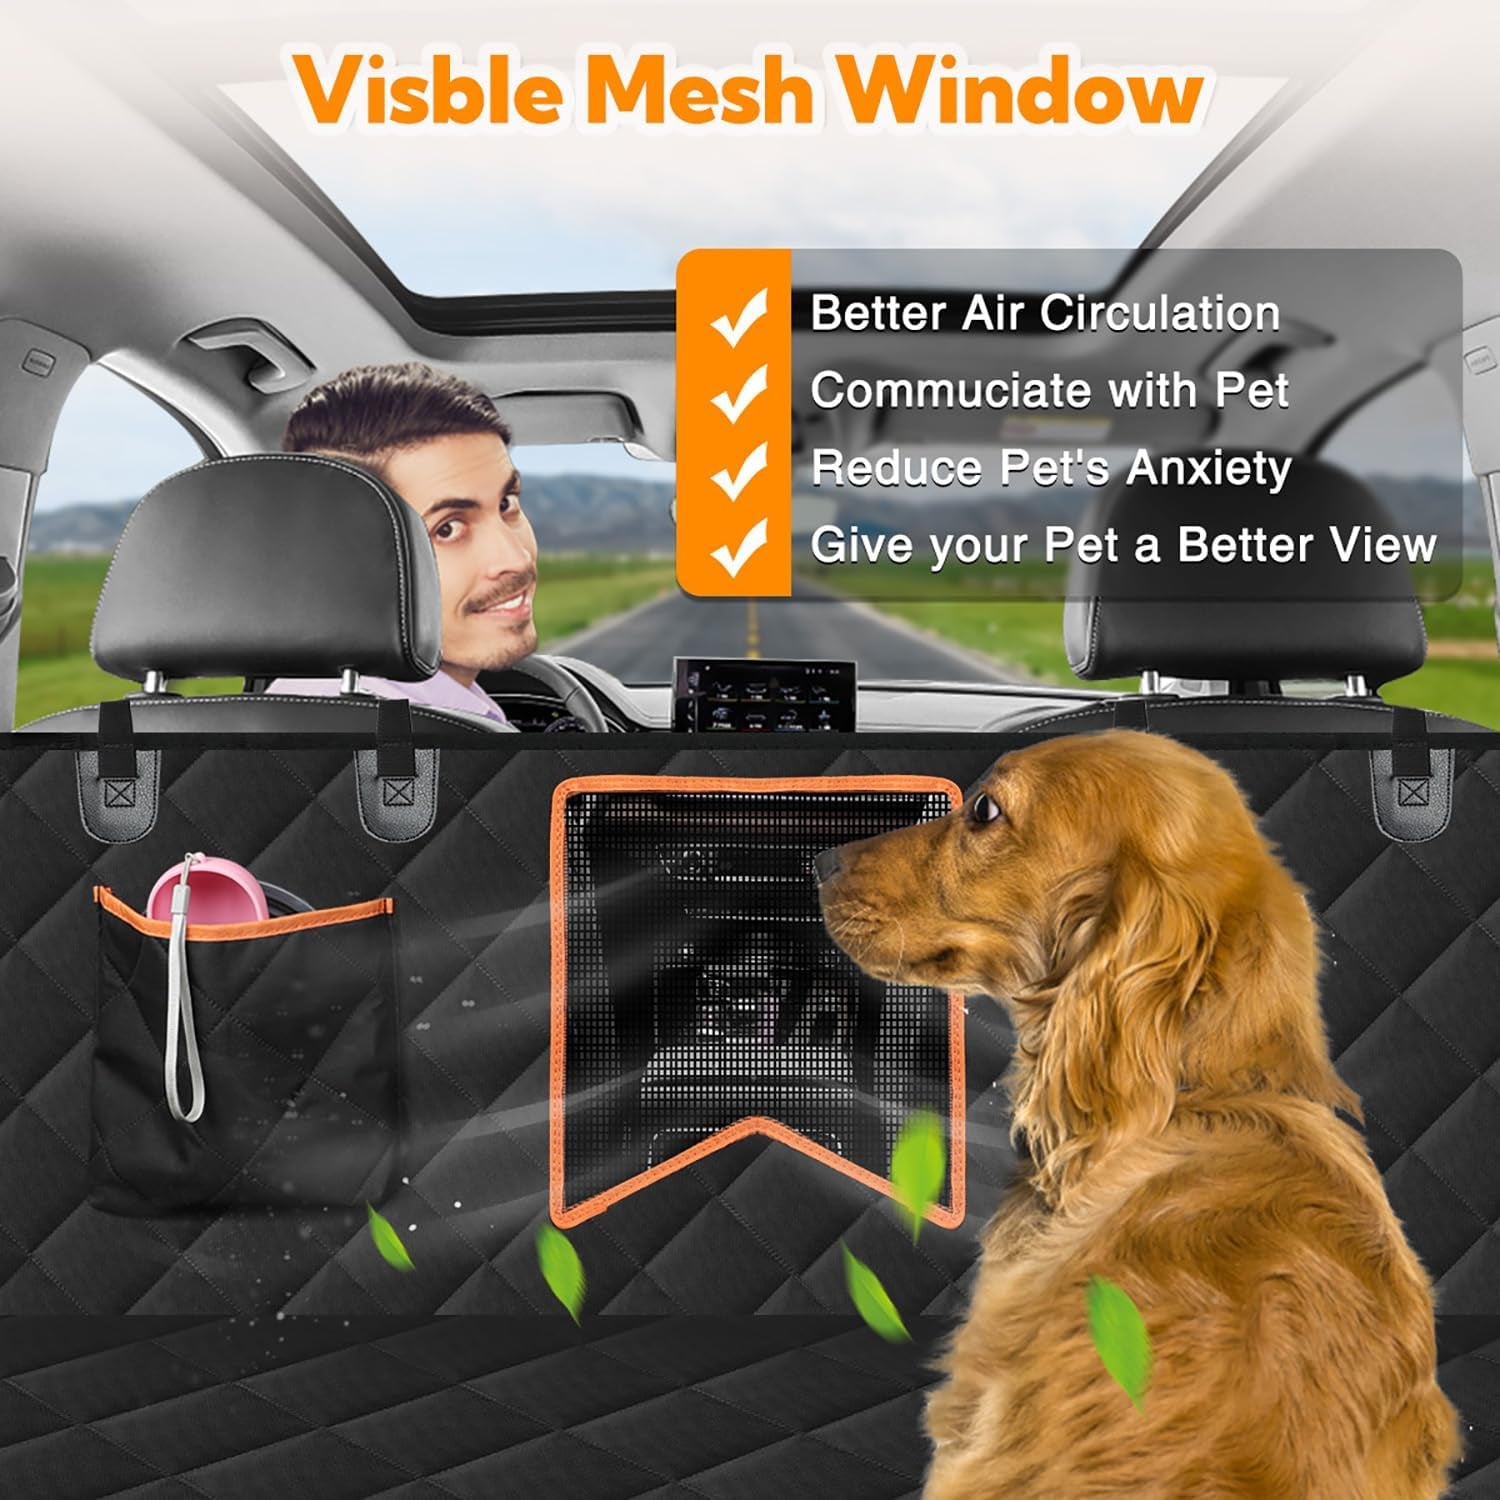 Dog Car Seat Cover for Back Seat,Waterproof Hammock with Mesh Window, Anti-Scratch Nonslip Car Seat Protector for Dogs, 600D Heavy Duty Dog Seat Cover for Cars Trucks and Suvs